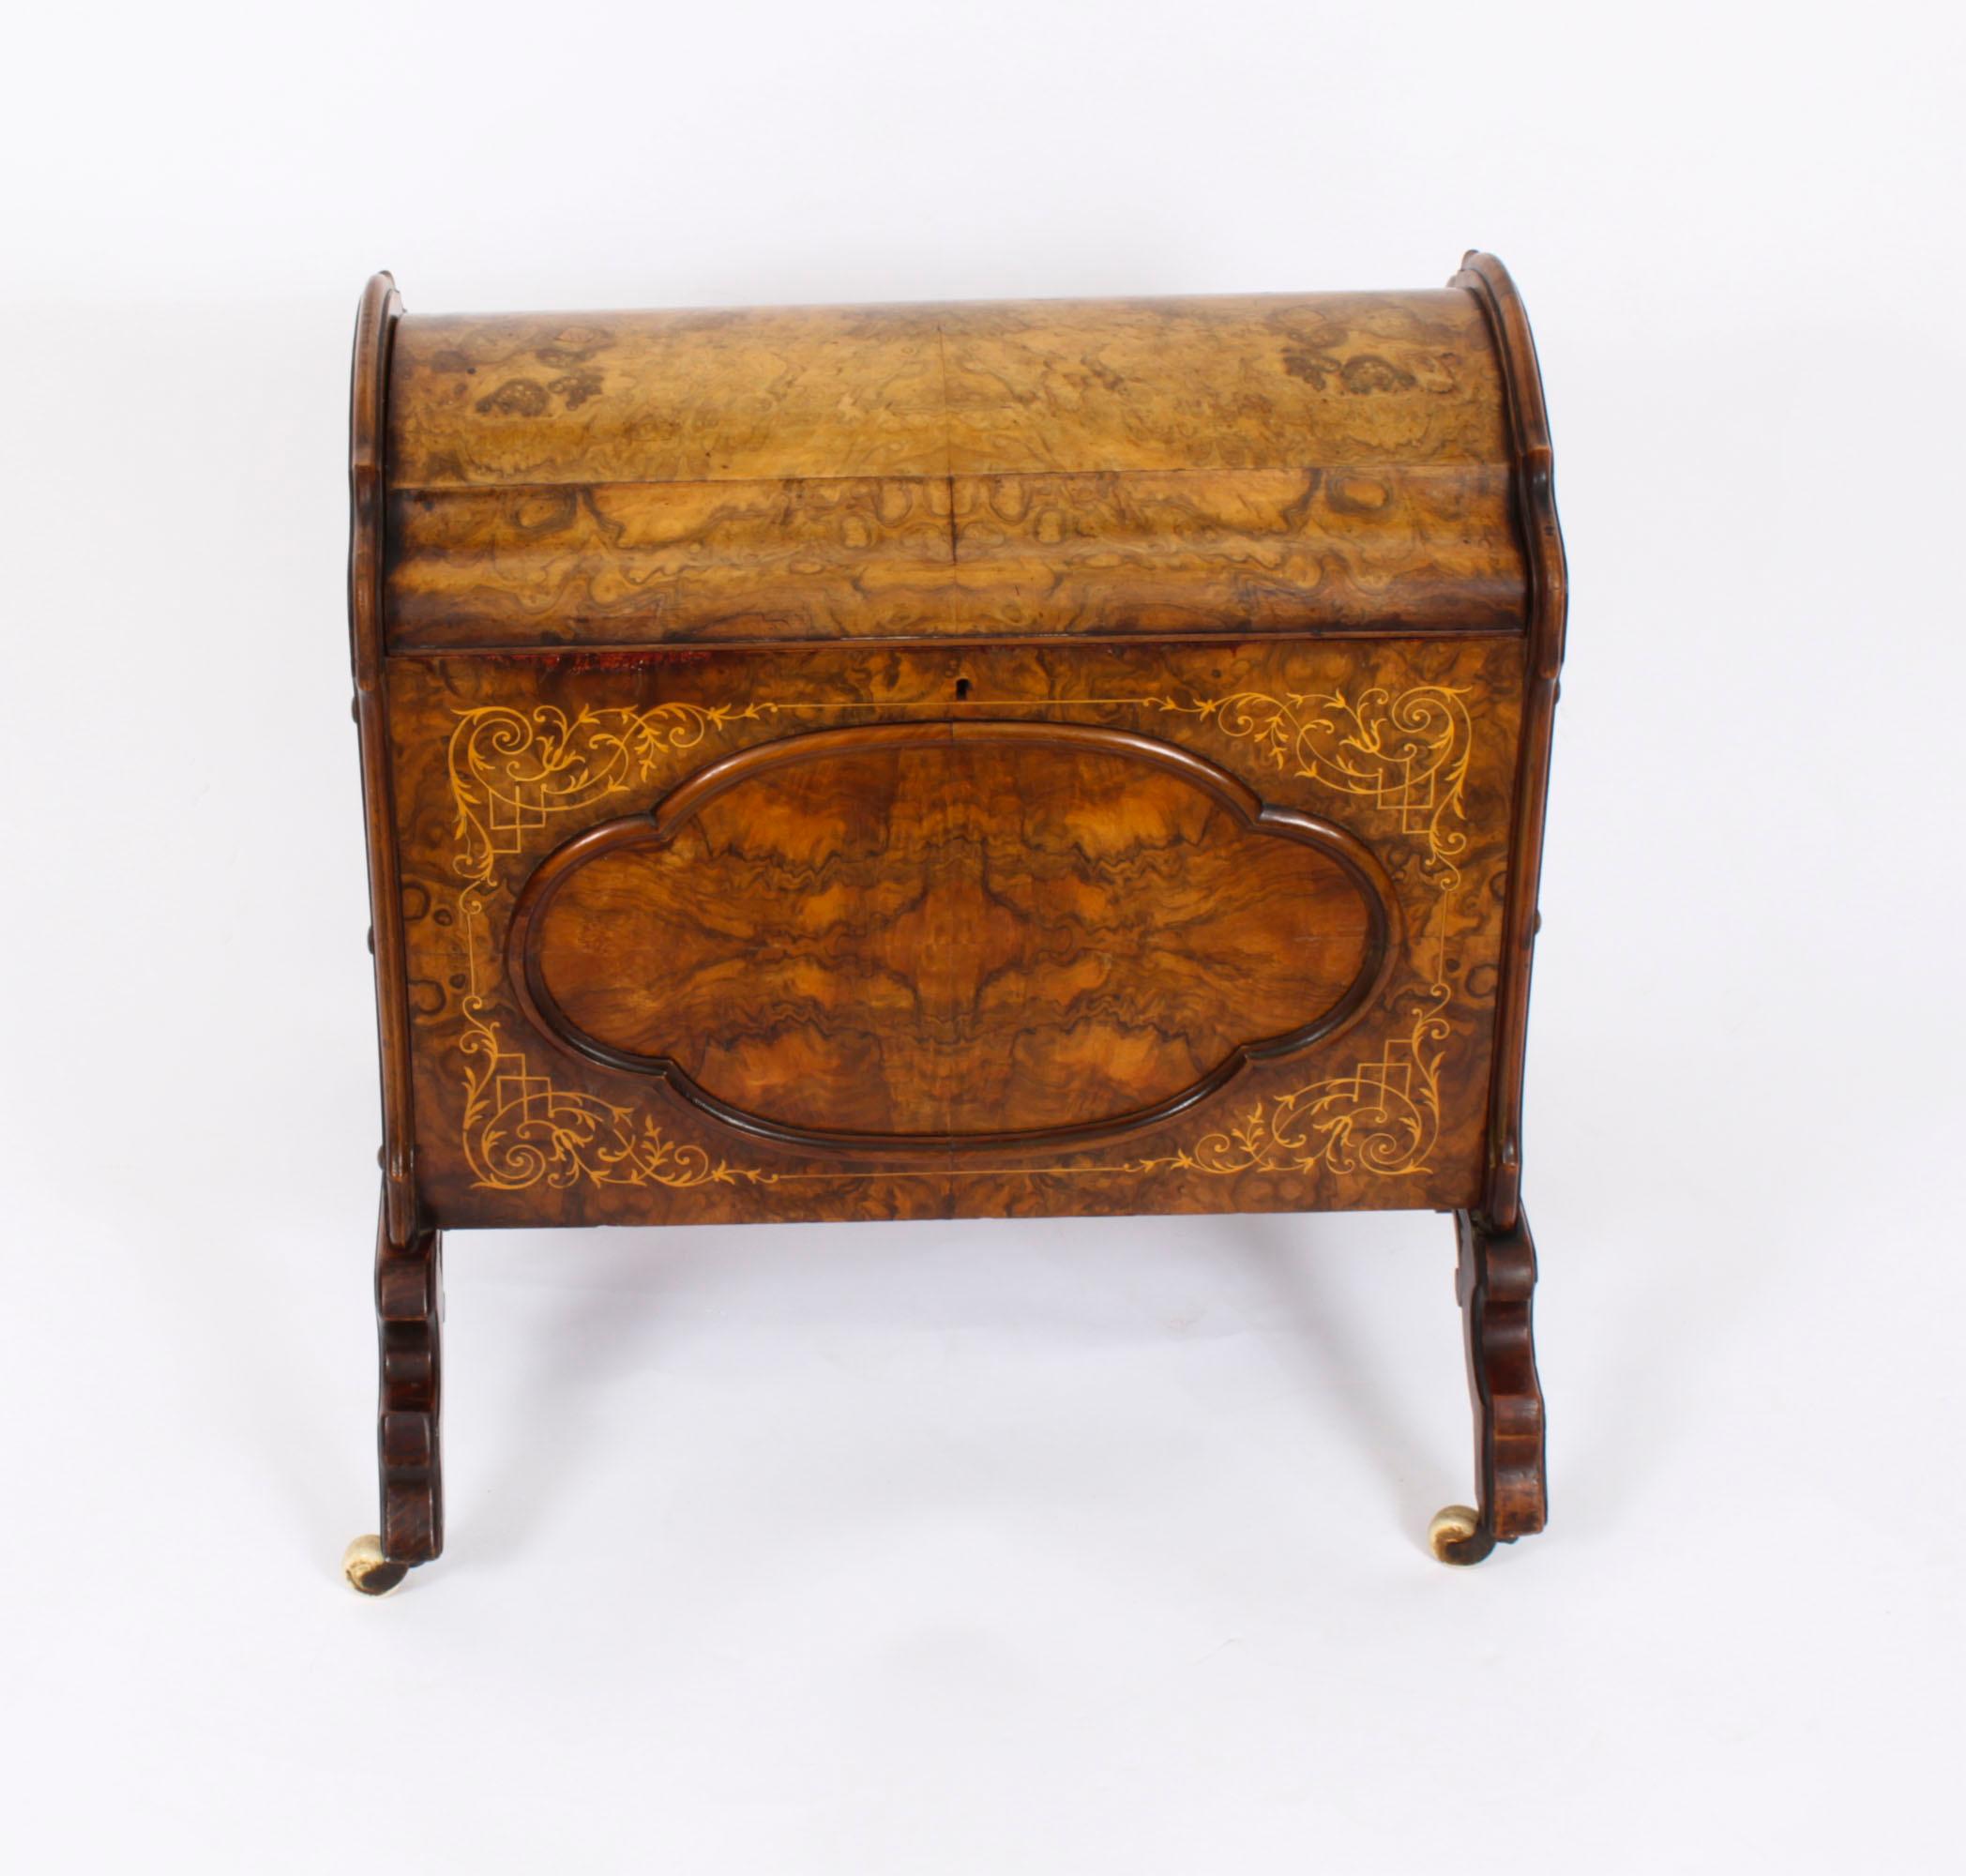 This is a gorgeous antique Victorian burr walnut and marquetry inlaid enclosed  Canterbury circa 1870 in date.
 
The grain of the burr walnut is truly beautiful. It features a hinged top opening to a divided interior. The sides are fitted with 